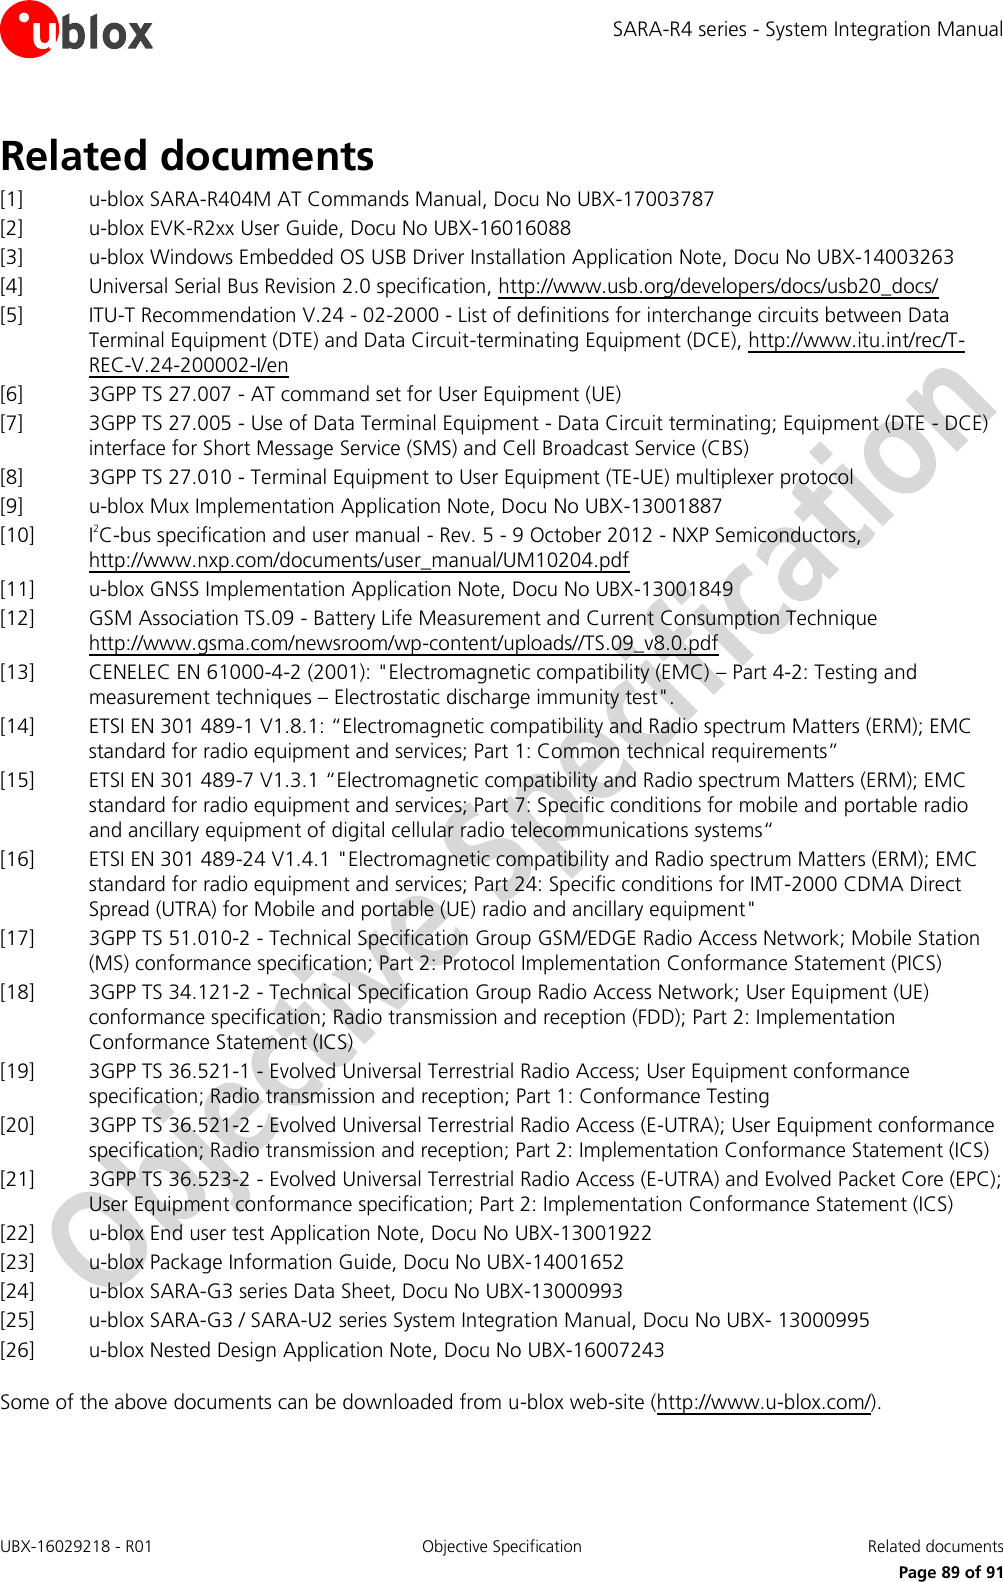 SARA-R4 series - System Integration Manual UBX-16029218 - R01  Objective Specification  Related documents      Page 89 of 91 Related documents [1] u-blox SARA-R404M AT Commands Manual, Docu No UBX-17003787 [2] u-blox EVK-R2xx User Guide, Docu No UBX-16016088 [3] u-blox Windows Embedded OS USB Driver Installation Application Note, Docu No UBX-14003263 [4] Universal Serial Bus Revision 2.0 specification, http://www.usb.org/developers/docs/usb20_docs/  [5] ITU-T Recommendation V.24 - 02-2000 - List of definitions for interchange circuits between Data Terminal Equipment (DTE) and Data Circuit-terminating Equipment (DCE), http://www.itu.int/rec/T-REC-V.24-200002-I/en [6] 3GPP TS 27.007 - AT command set for User Equipment (UE)  [7] 3GPP TS 27.005 - Use of Data Terminal Equipment - Data Circuit terminating; Equipment (DTE - DCE) interface for Short Message Service (SMS) and Cell Broadcast Service (CBS)  [8] 3GPP TS 27.010 - Terminal Equipment to User Equipment (TE-UE) multiplexer protocol [9] u-blox Mux Implementation Application Note, Docu No UBX-13001887 [10] I2C-bus specification and user manual - Rev. 5 - 9 October 2012 - NXP Semiconductors, http://www.nxp.com/documents/user_manual/UM10204.pdf [11] u-blox GNSS Implementation Application Note, Docu No UBX-13001849  [12] GSM Association TS.09 - Battery Life Measurement and Current Consumption Technique http://www.gsma.com/newsroom/wp-content/uploads//TS.09_v8.0.pdf [13] CENELEC EN 61000-4-2 (2001): &quot;Electromagnetic compatibility (EMC) – Part 4-2: Testing and measurement techniques – Electrostatic discharge immunity test&quot;. [14] ETSI EN 301 489-1 V1.8.1: “Electromagnetic compatibility and Radio spectrum Matters (ERM); EMC standard for radio equipment and services; Part 1: Common technical requirements” [15] ETSI EN 301 489-7 V1.3.1 “Electromagnetic compatibility and Radio spectrum Matters (ERM); EMC standard for radio equipment and services; Part 7: Specific conditions for mobile and portable radio and ancillary equipment of digital cellular radio telecommunications systems“ [16] ETSI EN 301 489-24 V1.4.1 &quot;Electromagnetic compatibility and Radio spectrum Matters (ERM); EMC standard for radio equipment and services; Part 24: Specific conditions for IMT-2000 CDMA Direct Spread (UTRA) for Mobile and portable (UE) radio and ancillary equipment&quot; [17] 3GPP TS 51.010-2 - Technical Specification Group GSM/EDGE Radio Access Network; Mobile Station (MS) conformance specification; Part 2: Protocol Implementation Conformance Statement (PICS) [18] 3GPP TS 34.121-2 - Technical Specification Group Radio Access Network; User Equipment (UE) conformance specification; Radio transmission and reception (FDD); Part 2: Implementation Conformance Statement (ICS) [19] 3GPP TS 36.521-1 - Evolved Universal Terrestrial Radio Access; User Equipment conformance specification; Radio transmission and reception; Part 1: Conformance Testing [20] 3GPP TS 36.521-2 - Evolved Universal Terrestrial Radio Access (E-UTRA); User Equipment conformance specification; Radio transmission and reception; Part 2: Implementation Conformance Statement (ICS) [21] 3GPP TS 36.523-2 - Evolved Universal Terrestrial Radio Access (E-UTRA) and Evolved Packet Core (EPC); User Equipment conformance specification; Part 2: Implementation Conformance Statement (ICS) [22] u-blox End user test Application Note, Docu No UBX-13001922 [23] u-blox Package Information Guide, Docu No UBX-14001652 [24] u-blox SARA-G3 series Data Sheet, Docu No UBX-13000993 [25] u-blox SARA-G3 / SARA-U2 series System Integration Manual, Docu No UBX- 13000995 [26] u-blox Nested Design Application Note, Docu No UBX-16007243  Some of the above documents can be downloaded from u-blox web-site (http://www.u-blox.com/). 